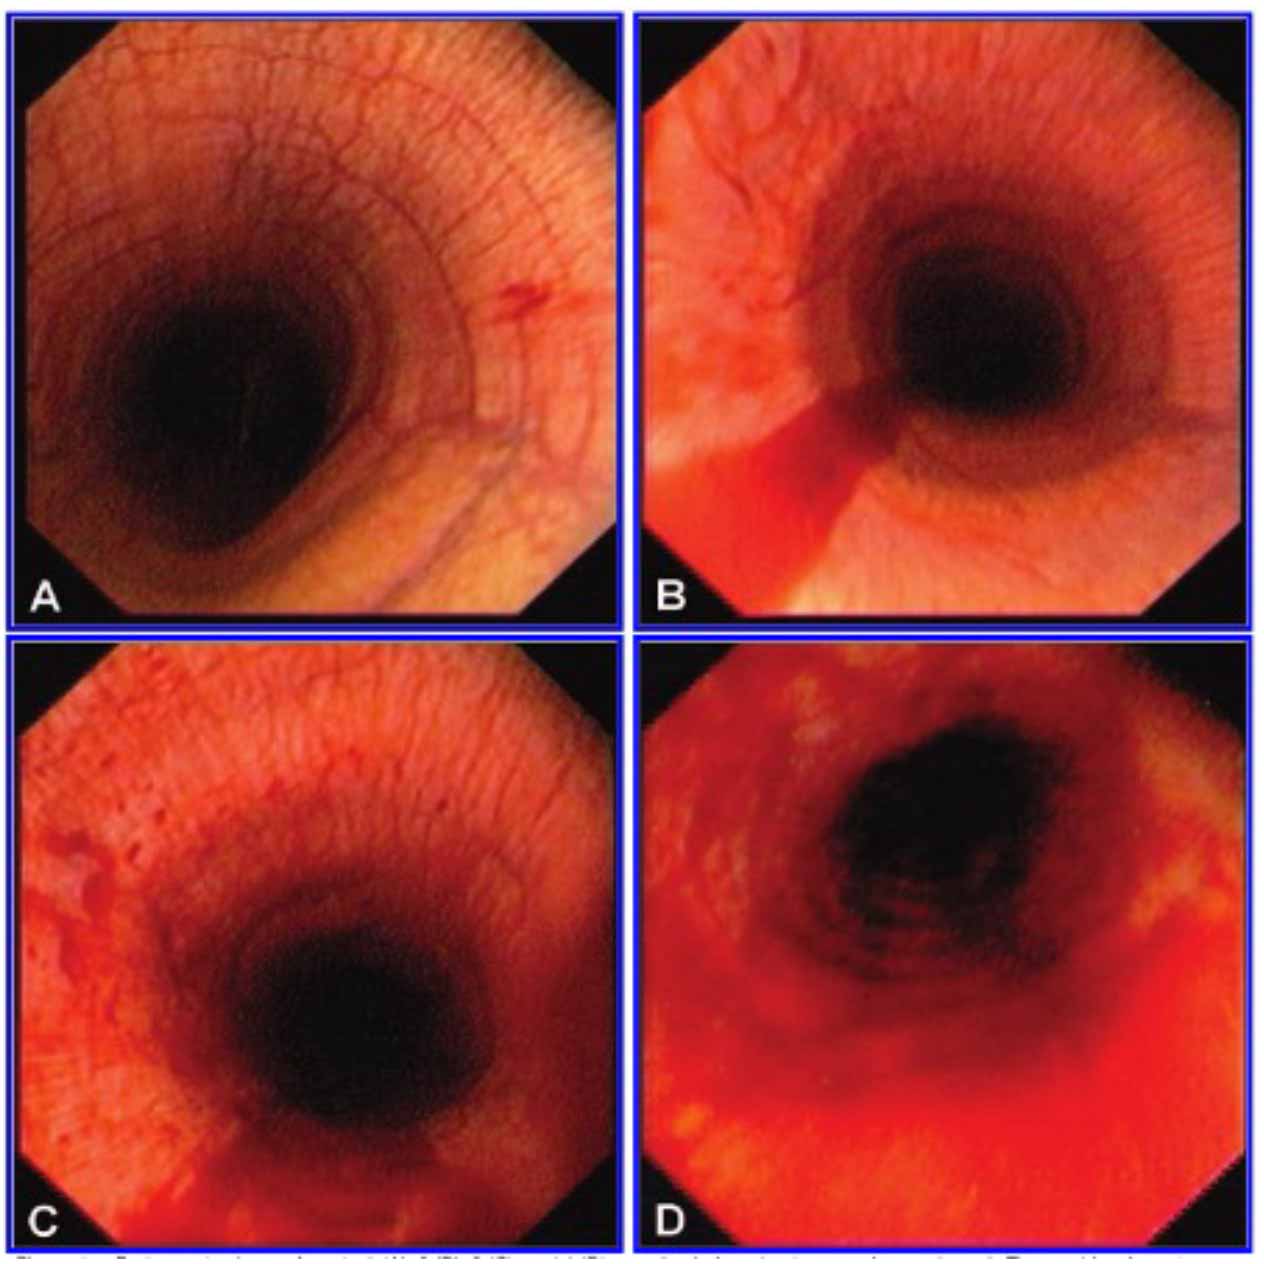 Figure 1. Endoscopic views of grades 1 to 4 (A to D, respectively) adapted directly from Hinchcliff et al26.